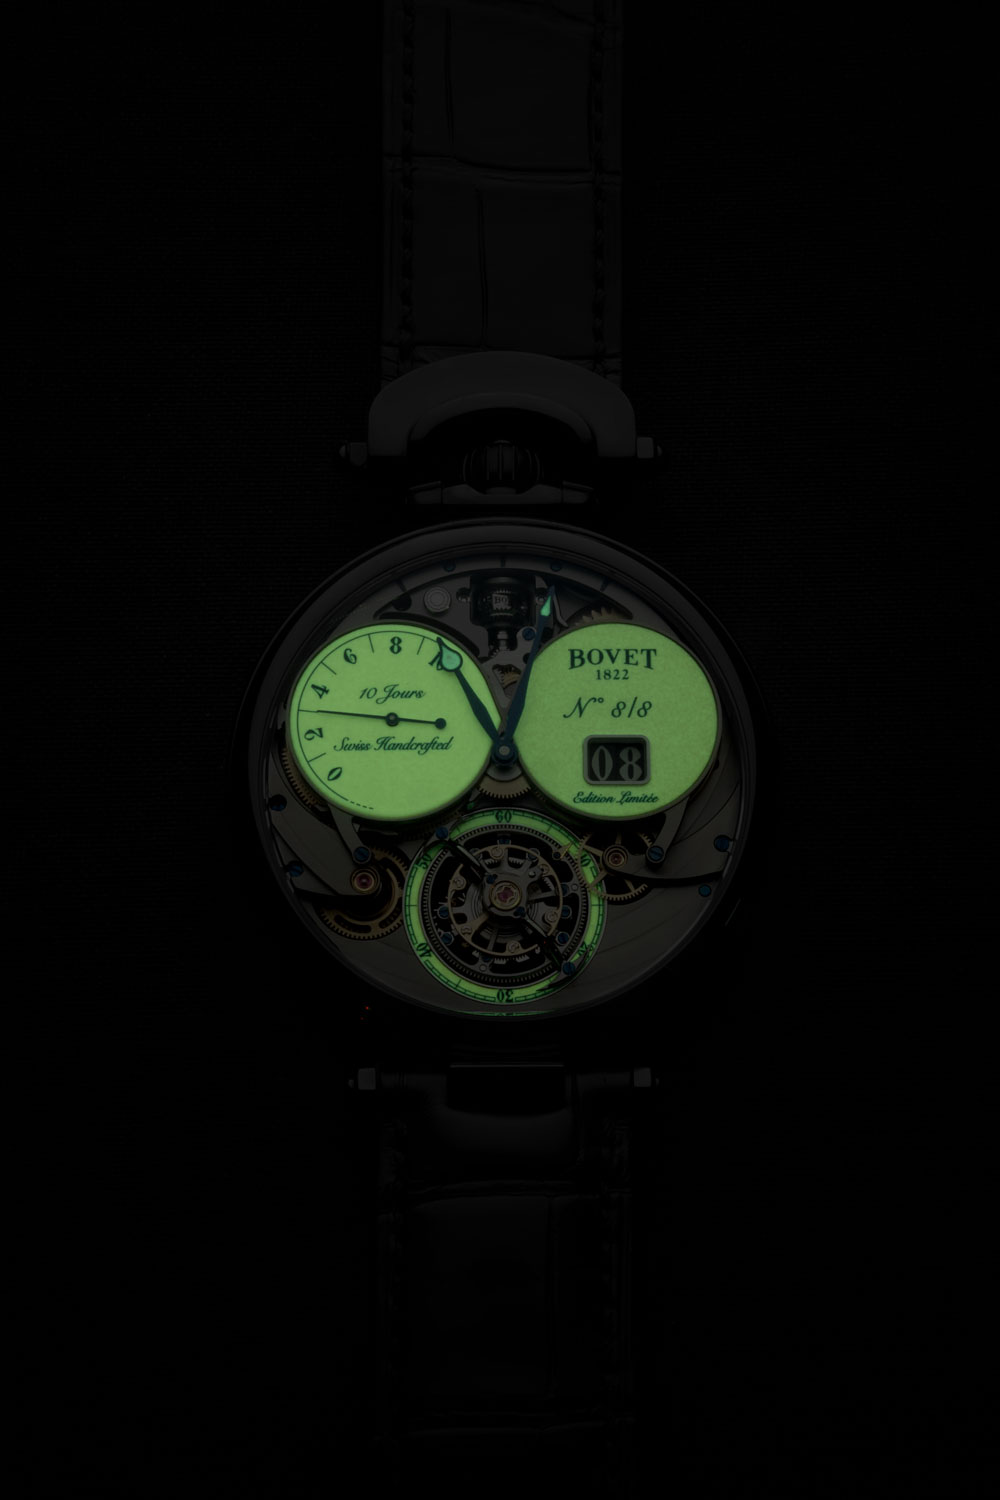 The Bovet 1822 Virtuoso VIII Chapter Two Reimagined in the dark